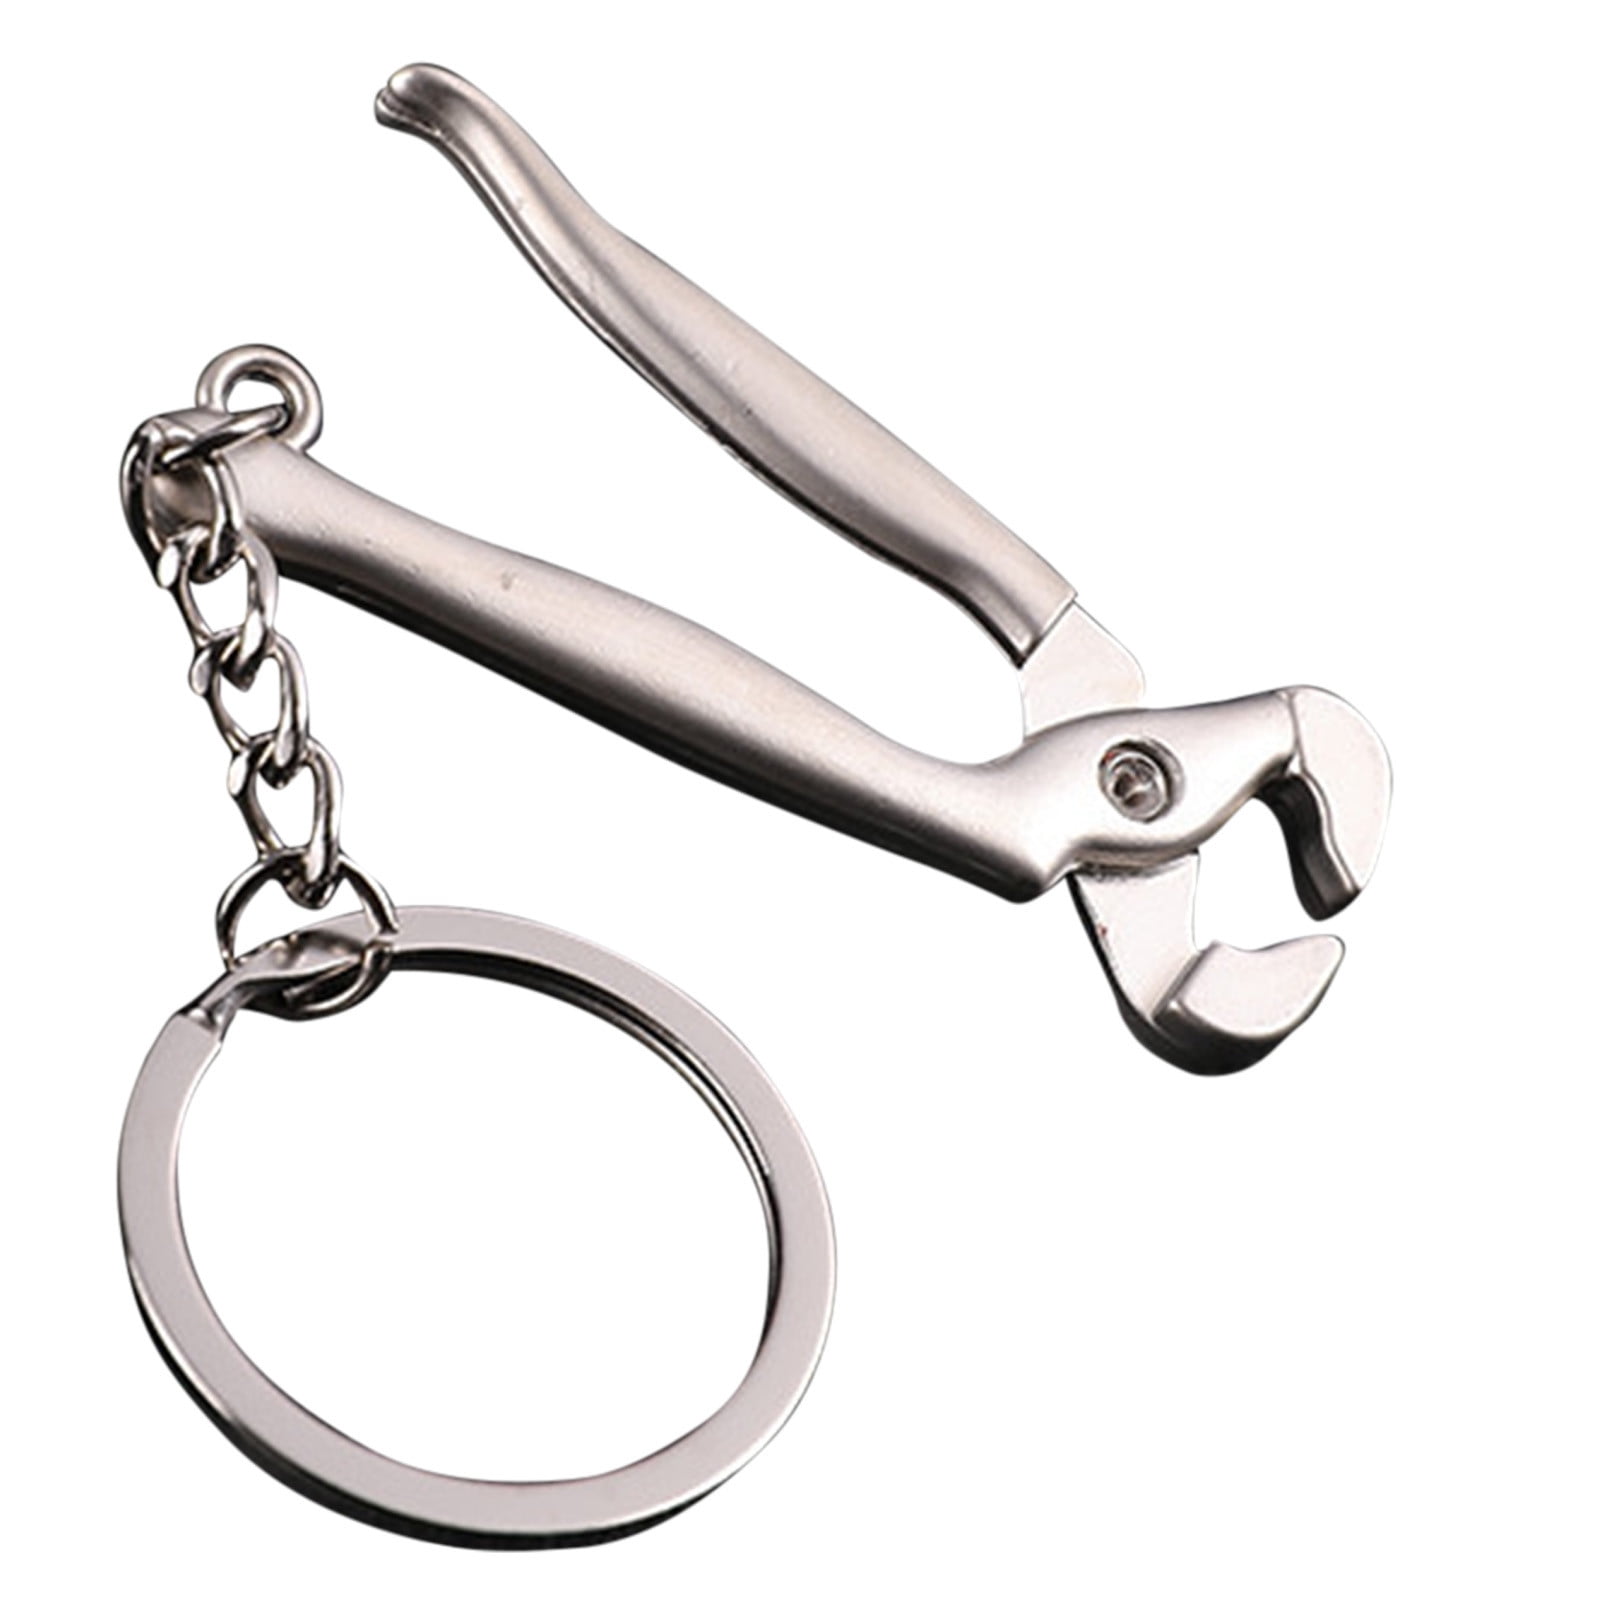 Metal Adjustable Creative Tool Wrench Spanner Key Chain Ring Keyring 